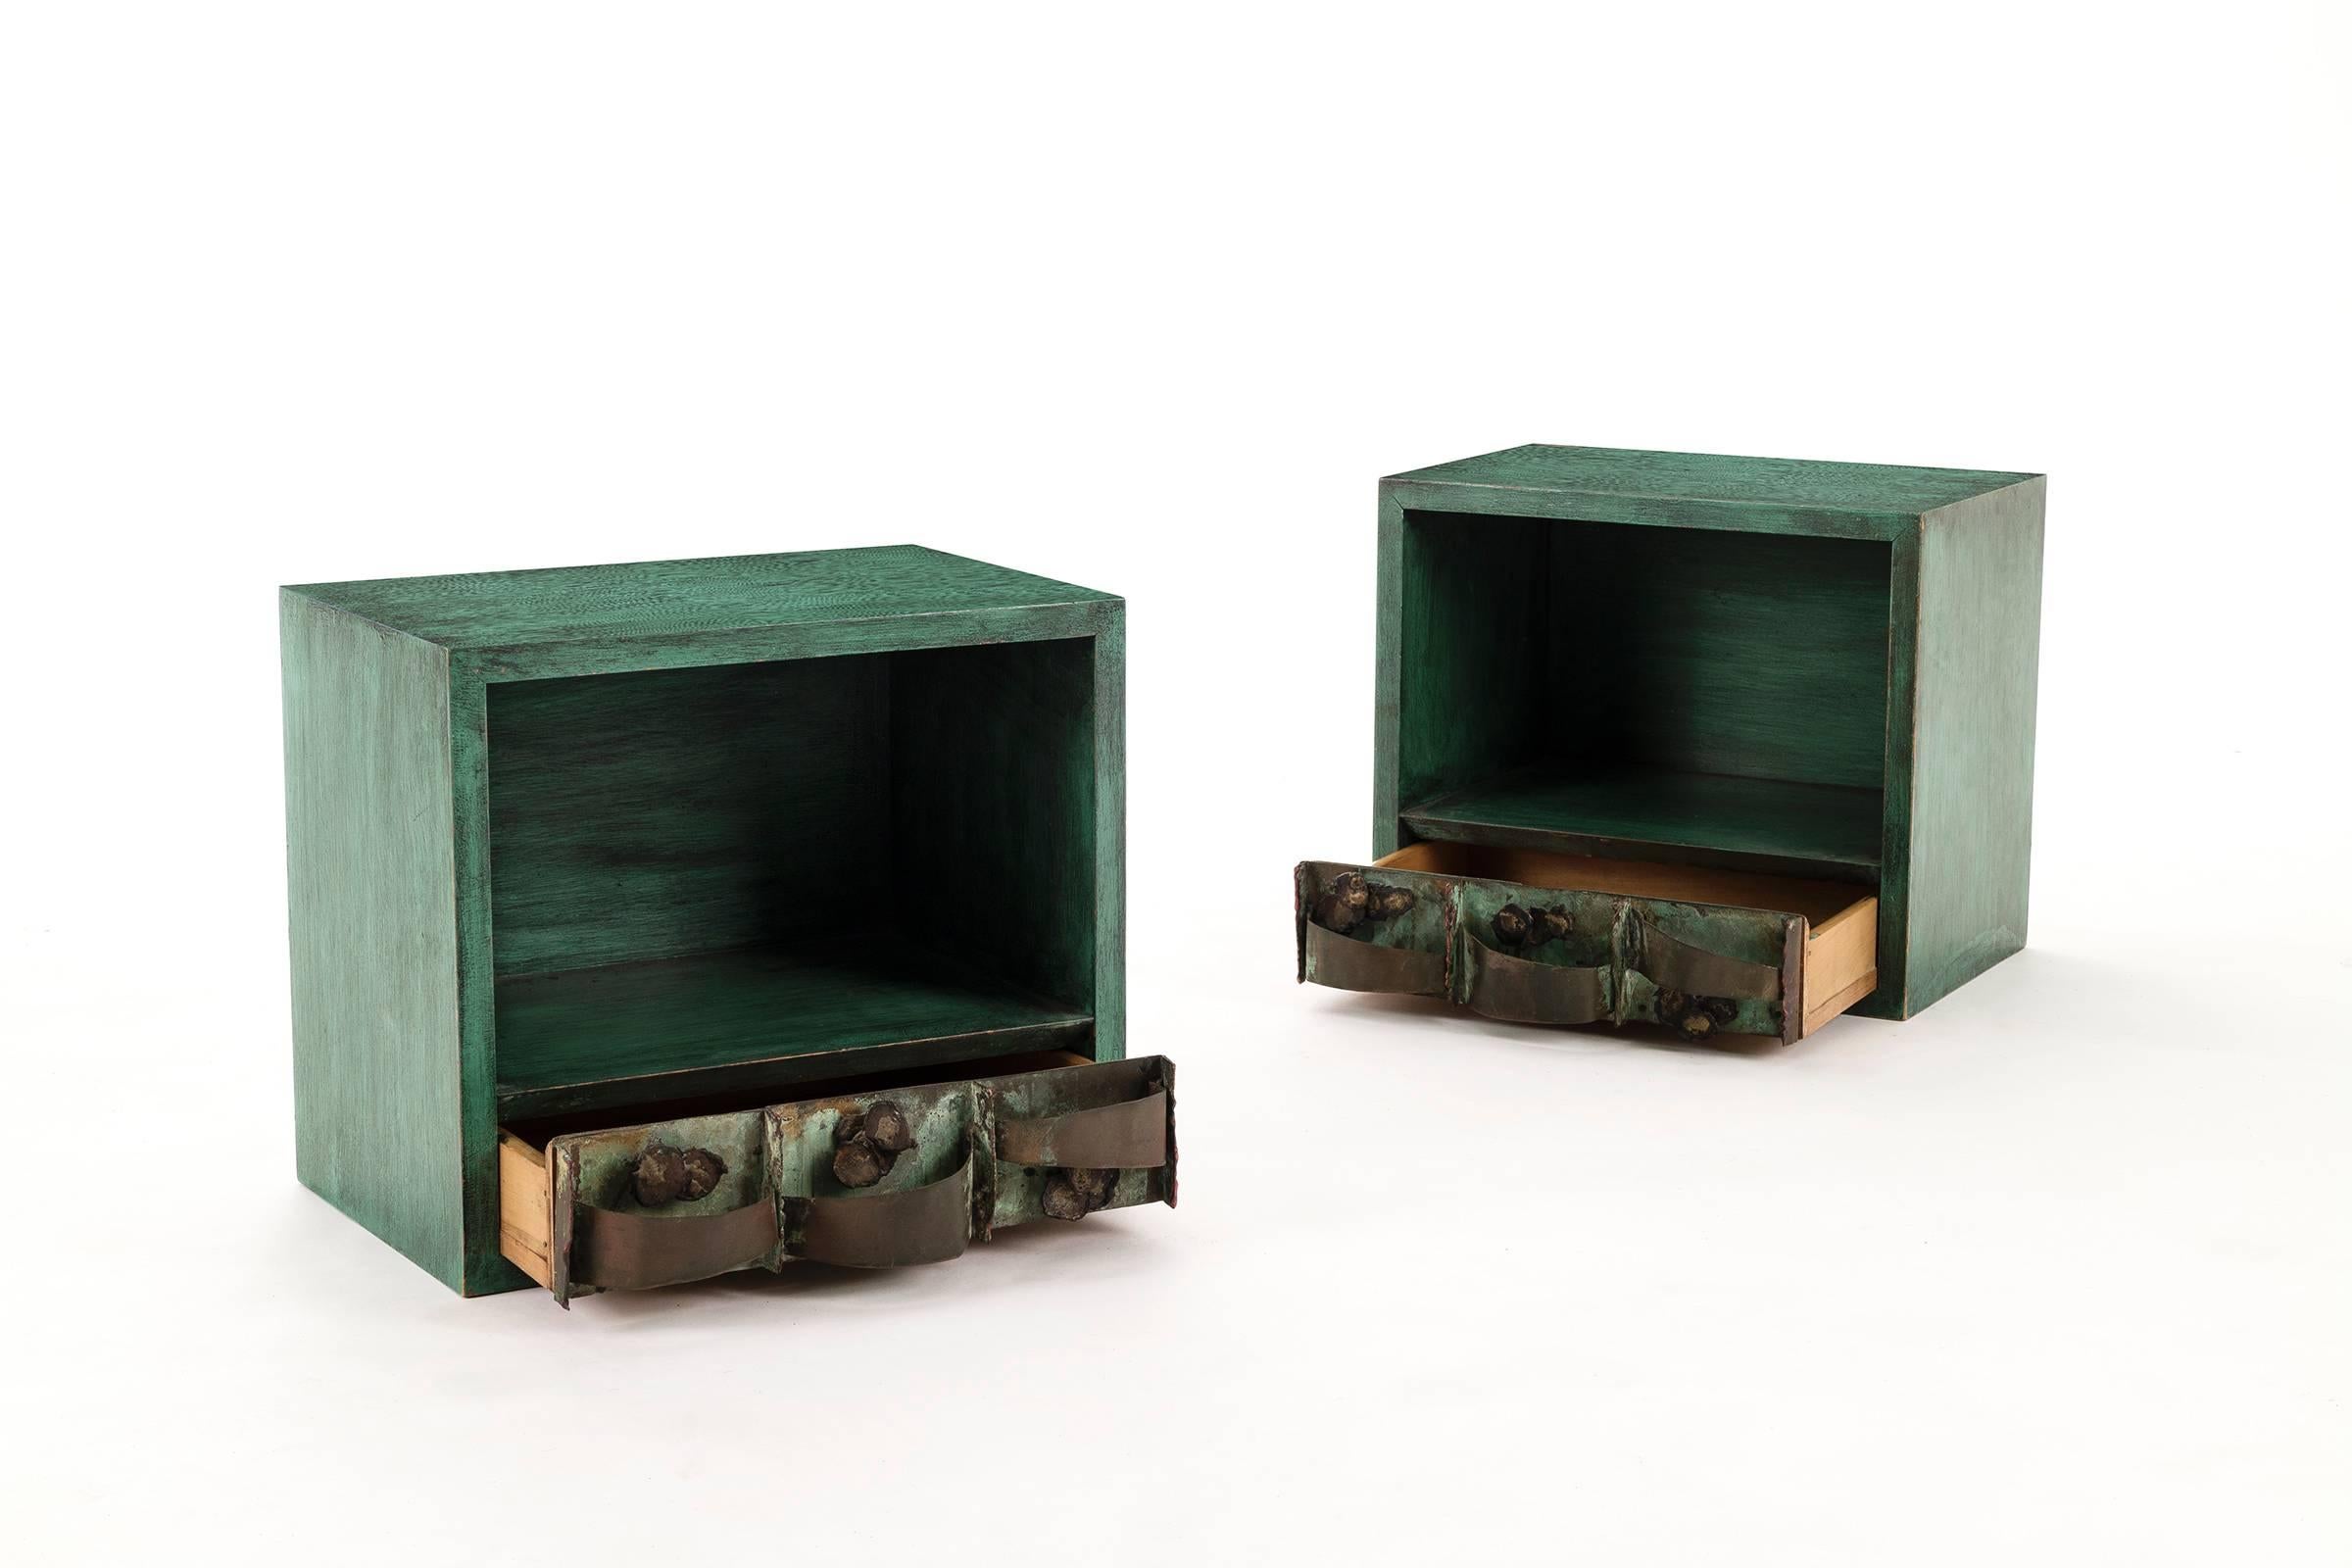 Paul Evans Studio, wall hung nightstands, verdigris sculpted
looped copper details, act as pulls. Antiqued exterior and interior finishes.
 
This item is currently on view in our NYC Greenwich Street Location.